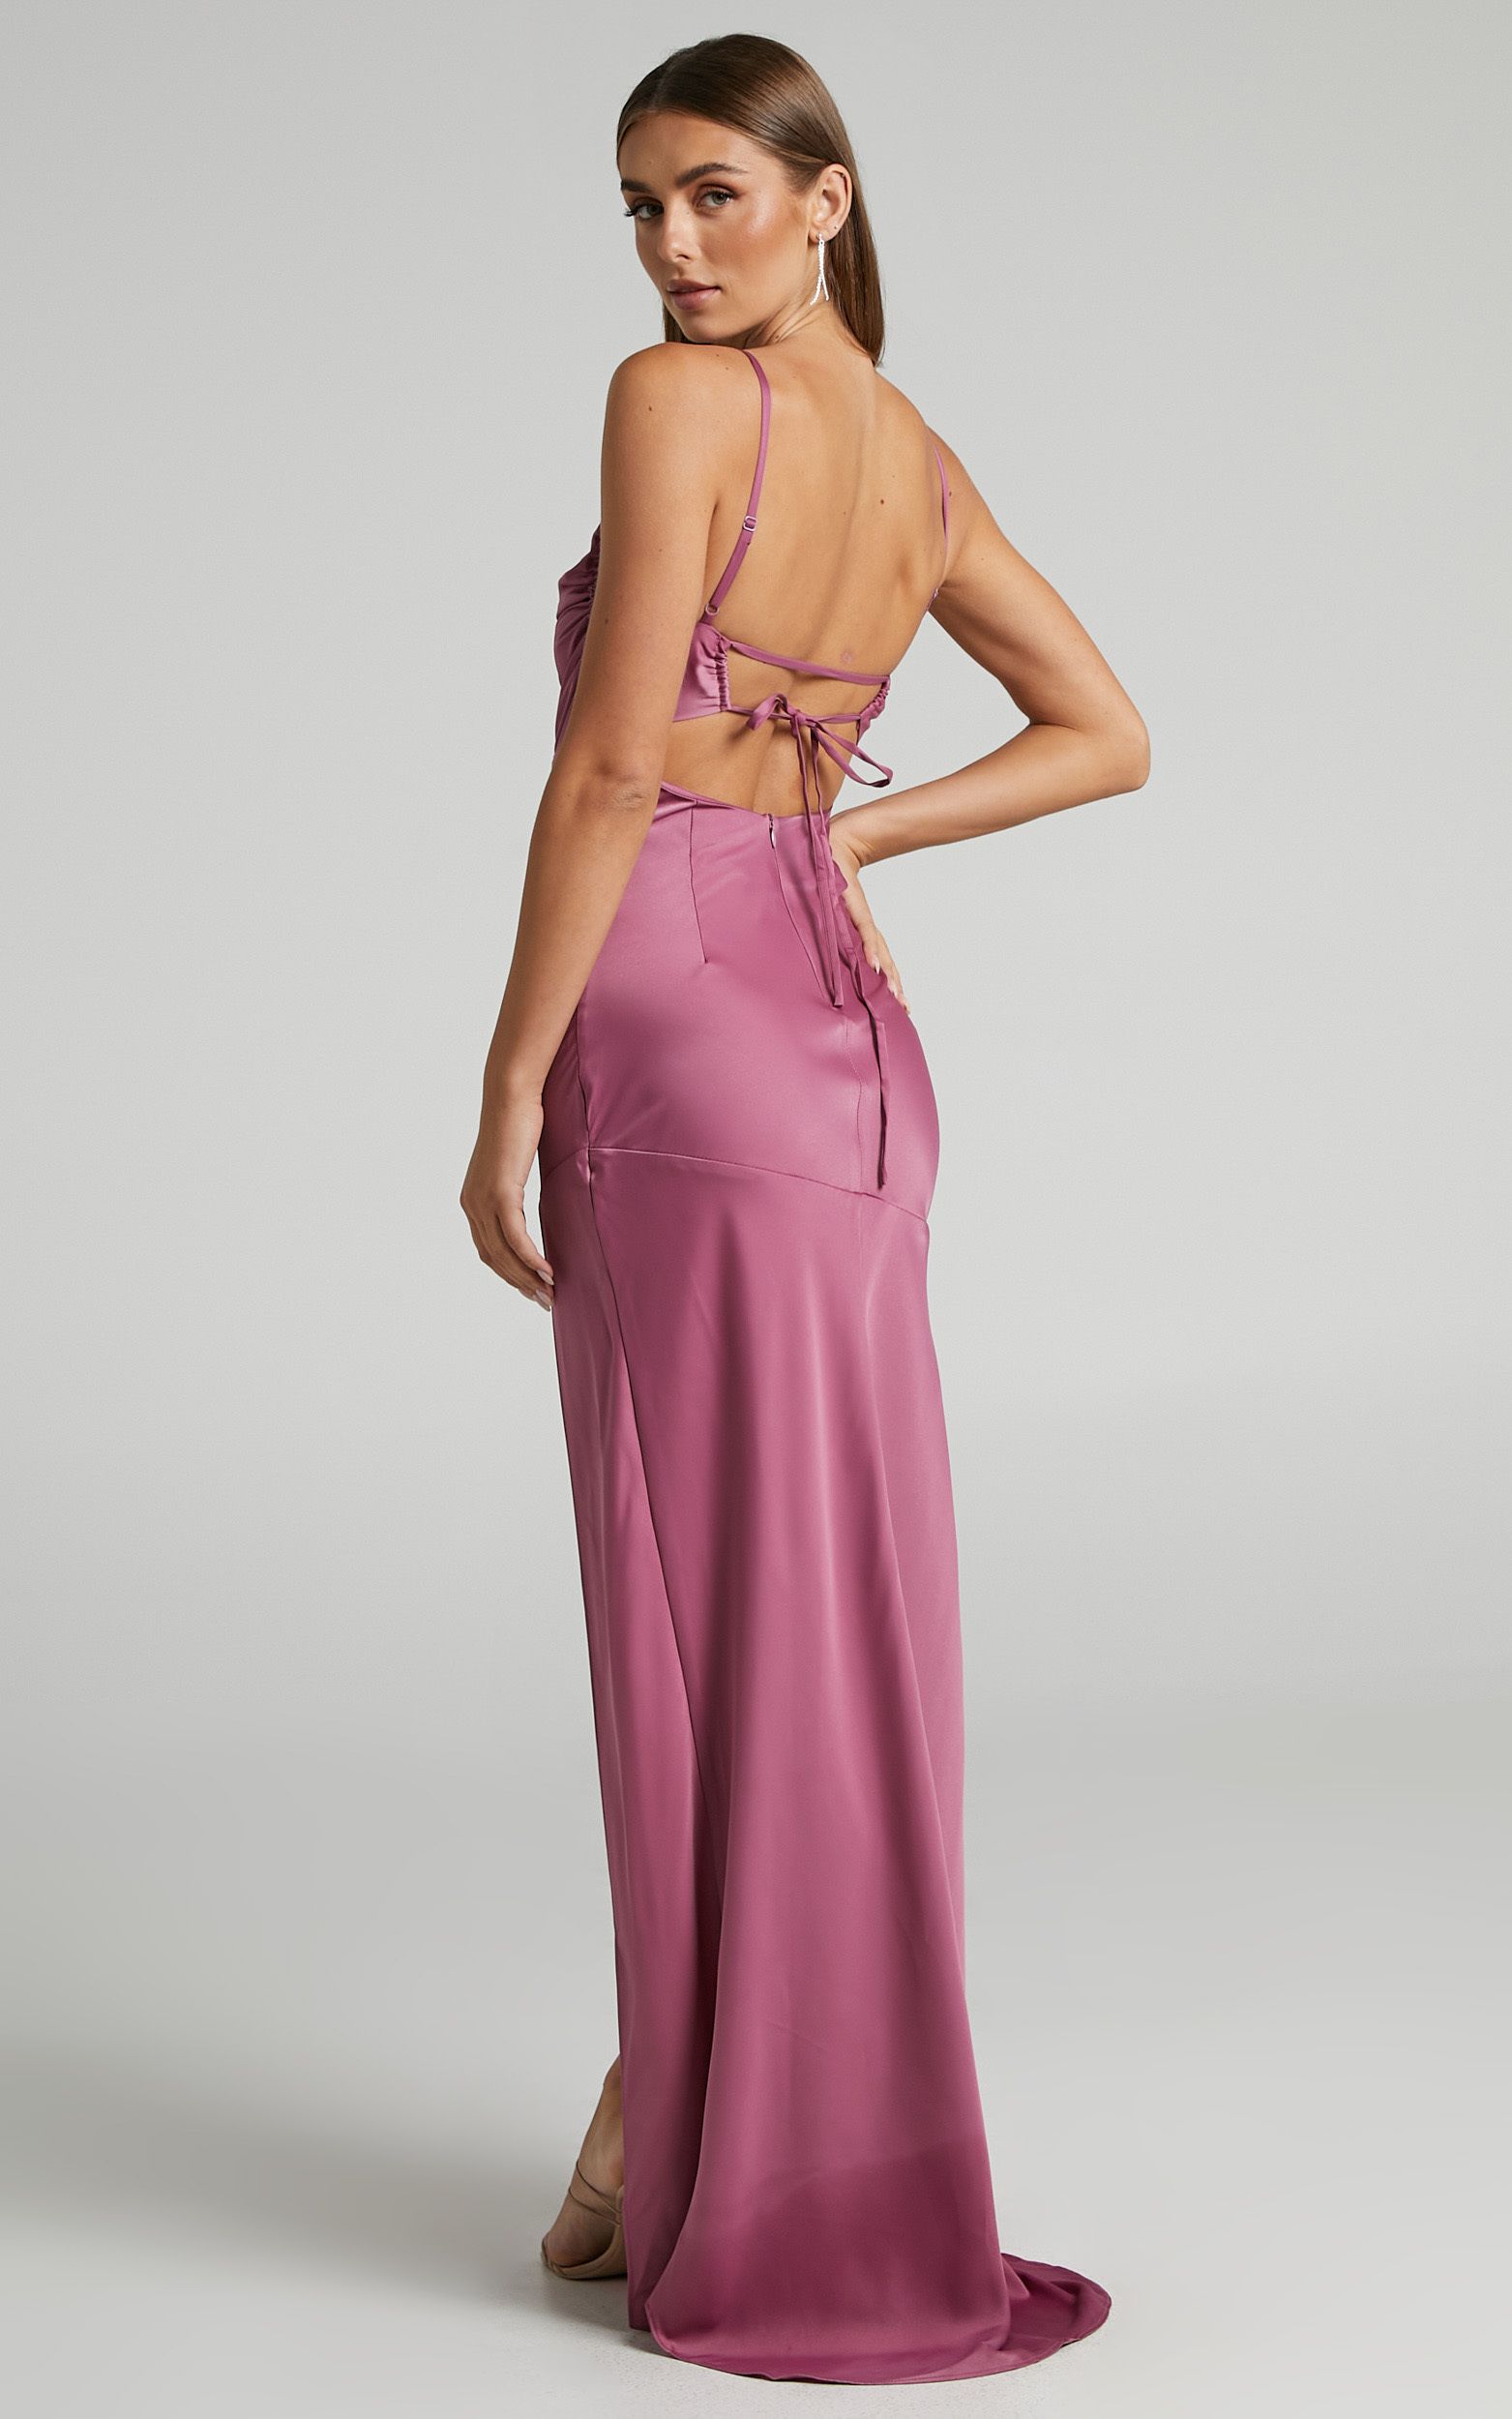 Ardent Maxi Dress - Cowl Neck Tie Back Satin Dress in Orchid | Showpo (US, UK & Europe)